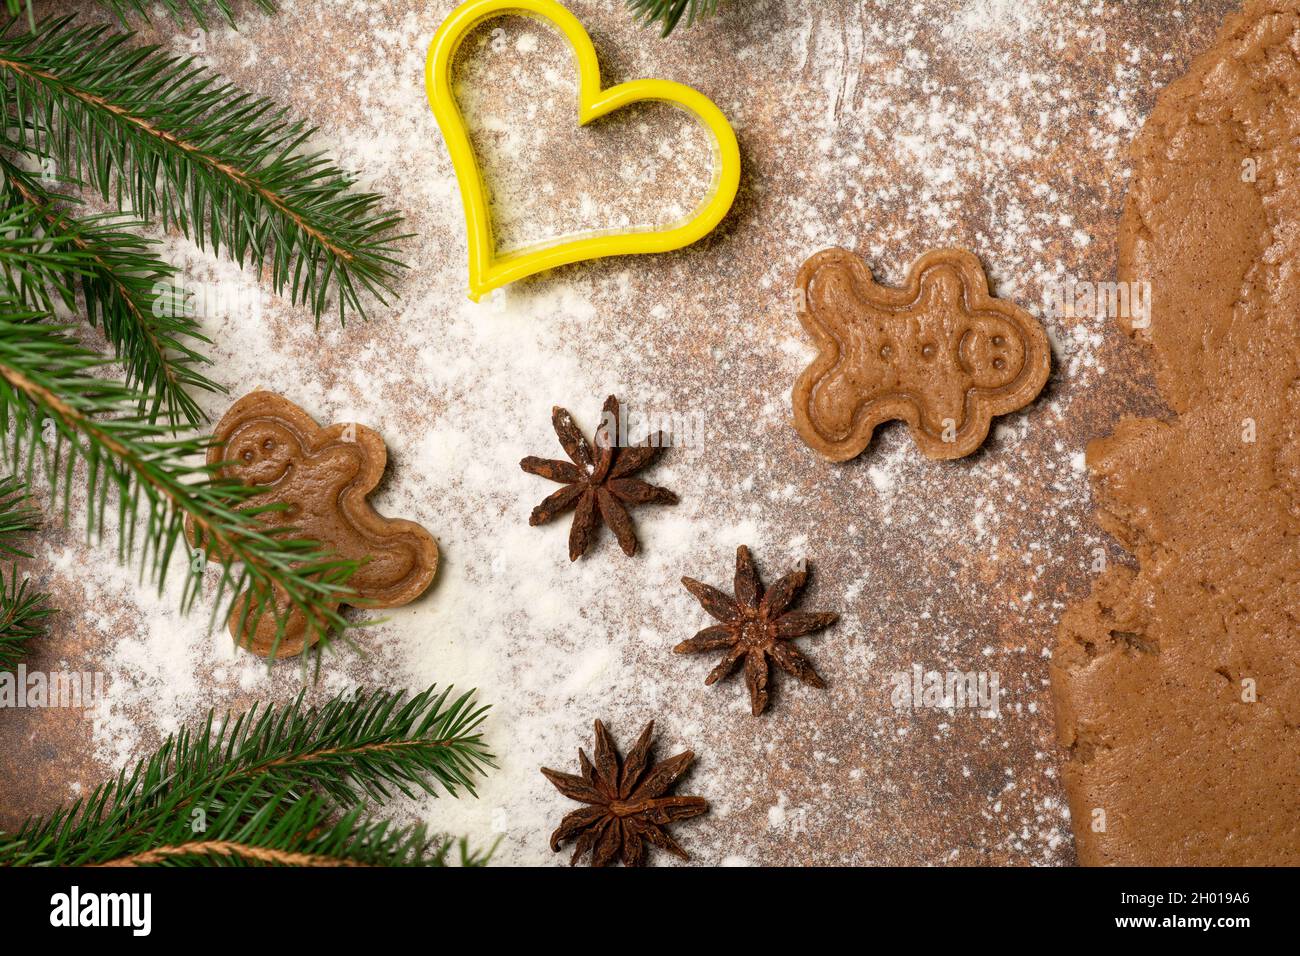 Two gingerbread man cookies, star anise fruits, a cookie cutter, fir branches, a piece of rolled out dough are lying on a surface sprinkled with flour Stock Photo